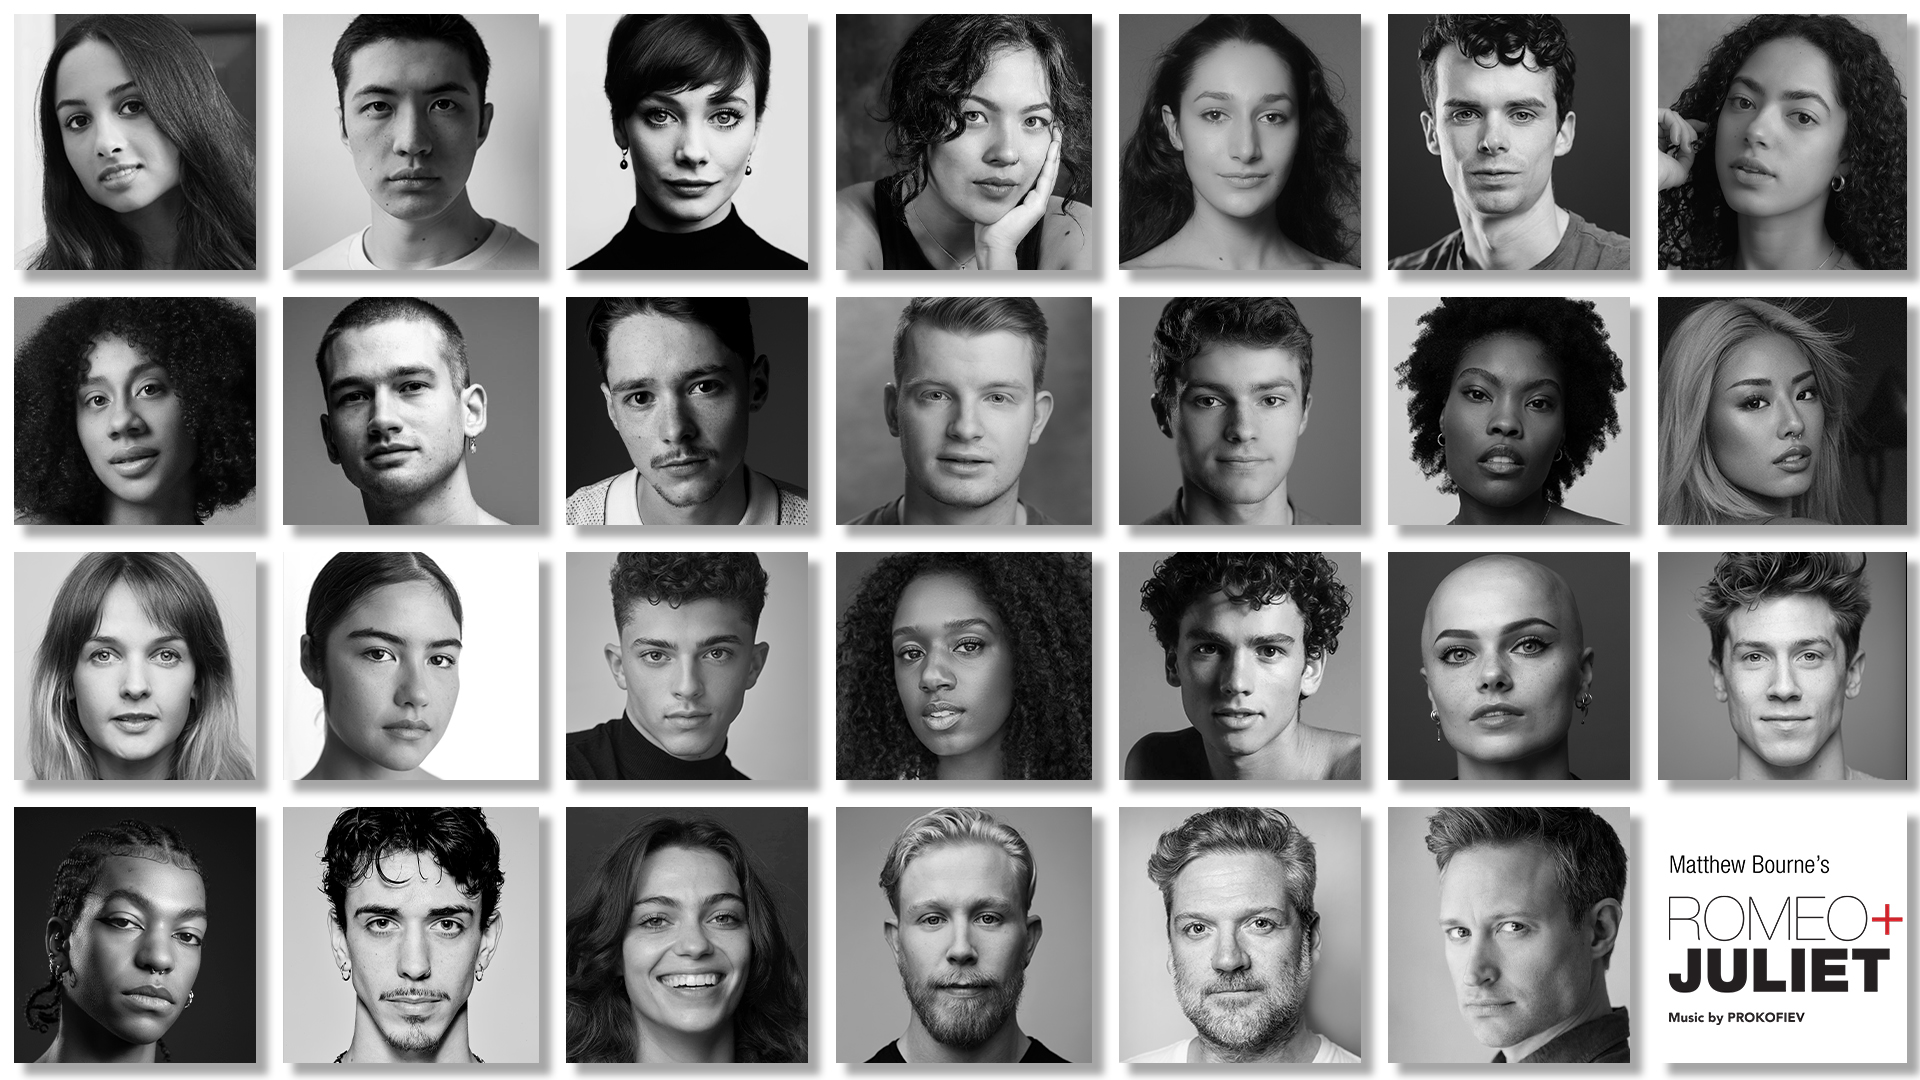 Casting announced for Matthew Bourne's Romeo and Juliet - Curve Theatre,  Leicester